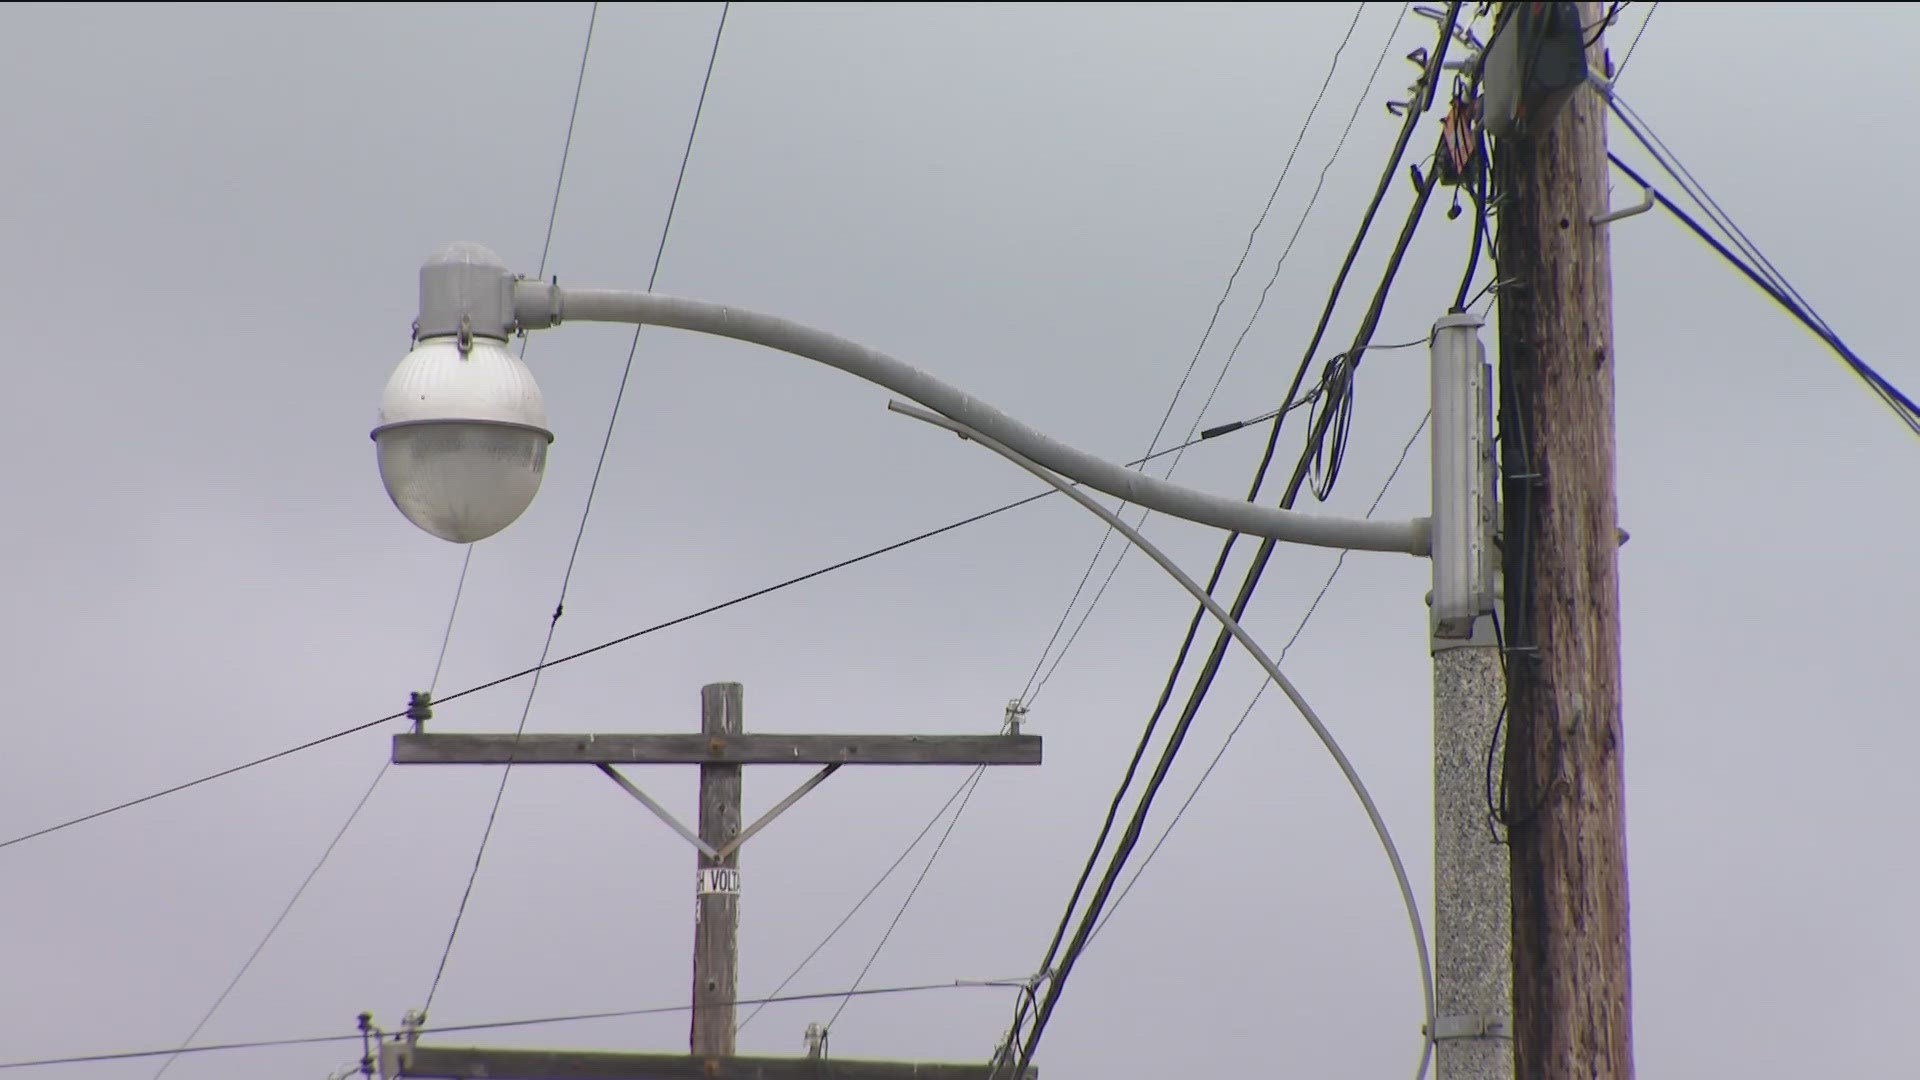 “It is very frustrating being that we are a cul-de-sac and it’s very dark down here, you know, we don’t have extra lights down here at all,” said a resident.